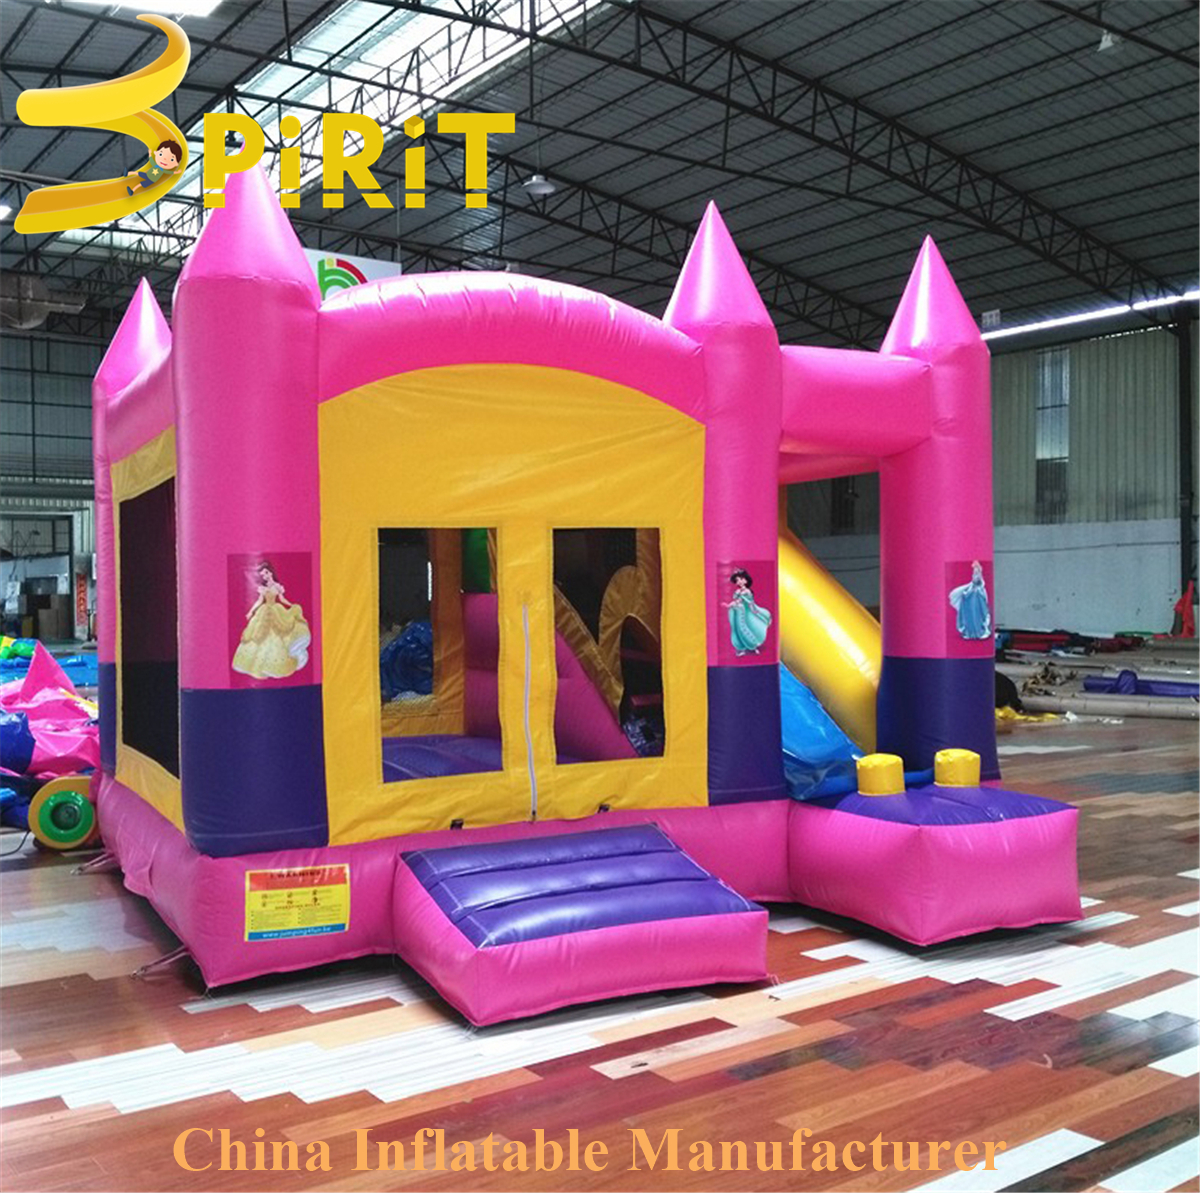 Oxford fabric colorful custom Jumping Castles with slide-SPIRIT PLAY,Outdoor Playground, Indoor Playground,Trampoline Park,Outdoor Fitness,Inflatable,Soft Playground,Ninja Warrior,Trampoline Park,Playground Structure,Play Structure,Outdoor Fitness,Water Park,Play System,Freestanding,Interactive,independente ,Inklusibo, Park, Pagsaka sa Bungbong, Dula sa Bata